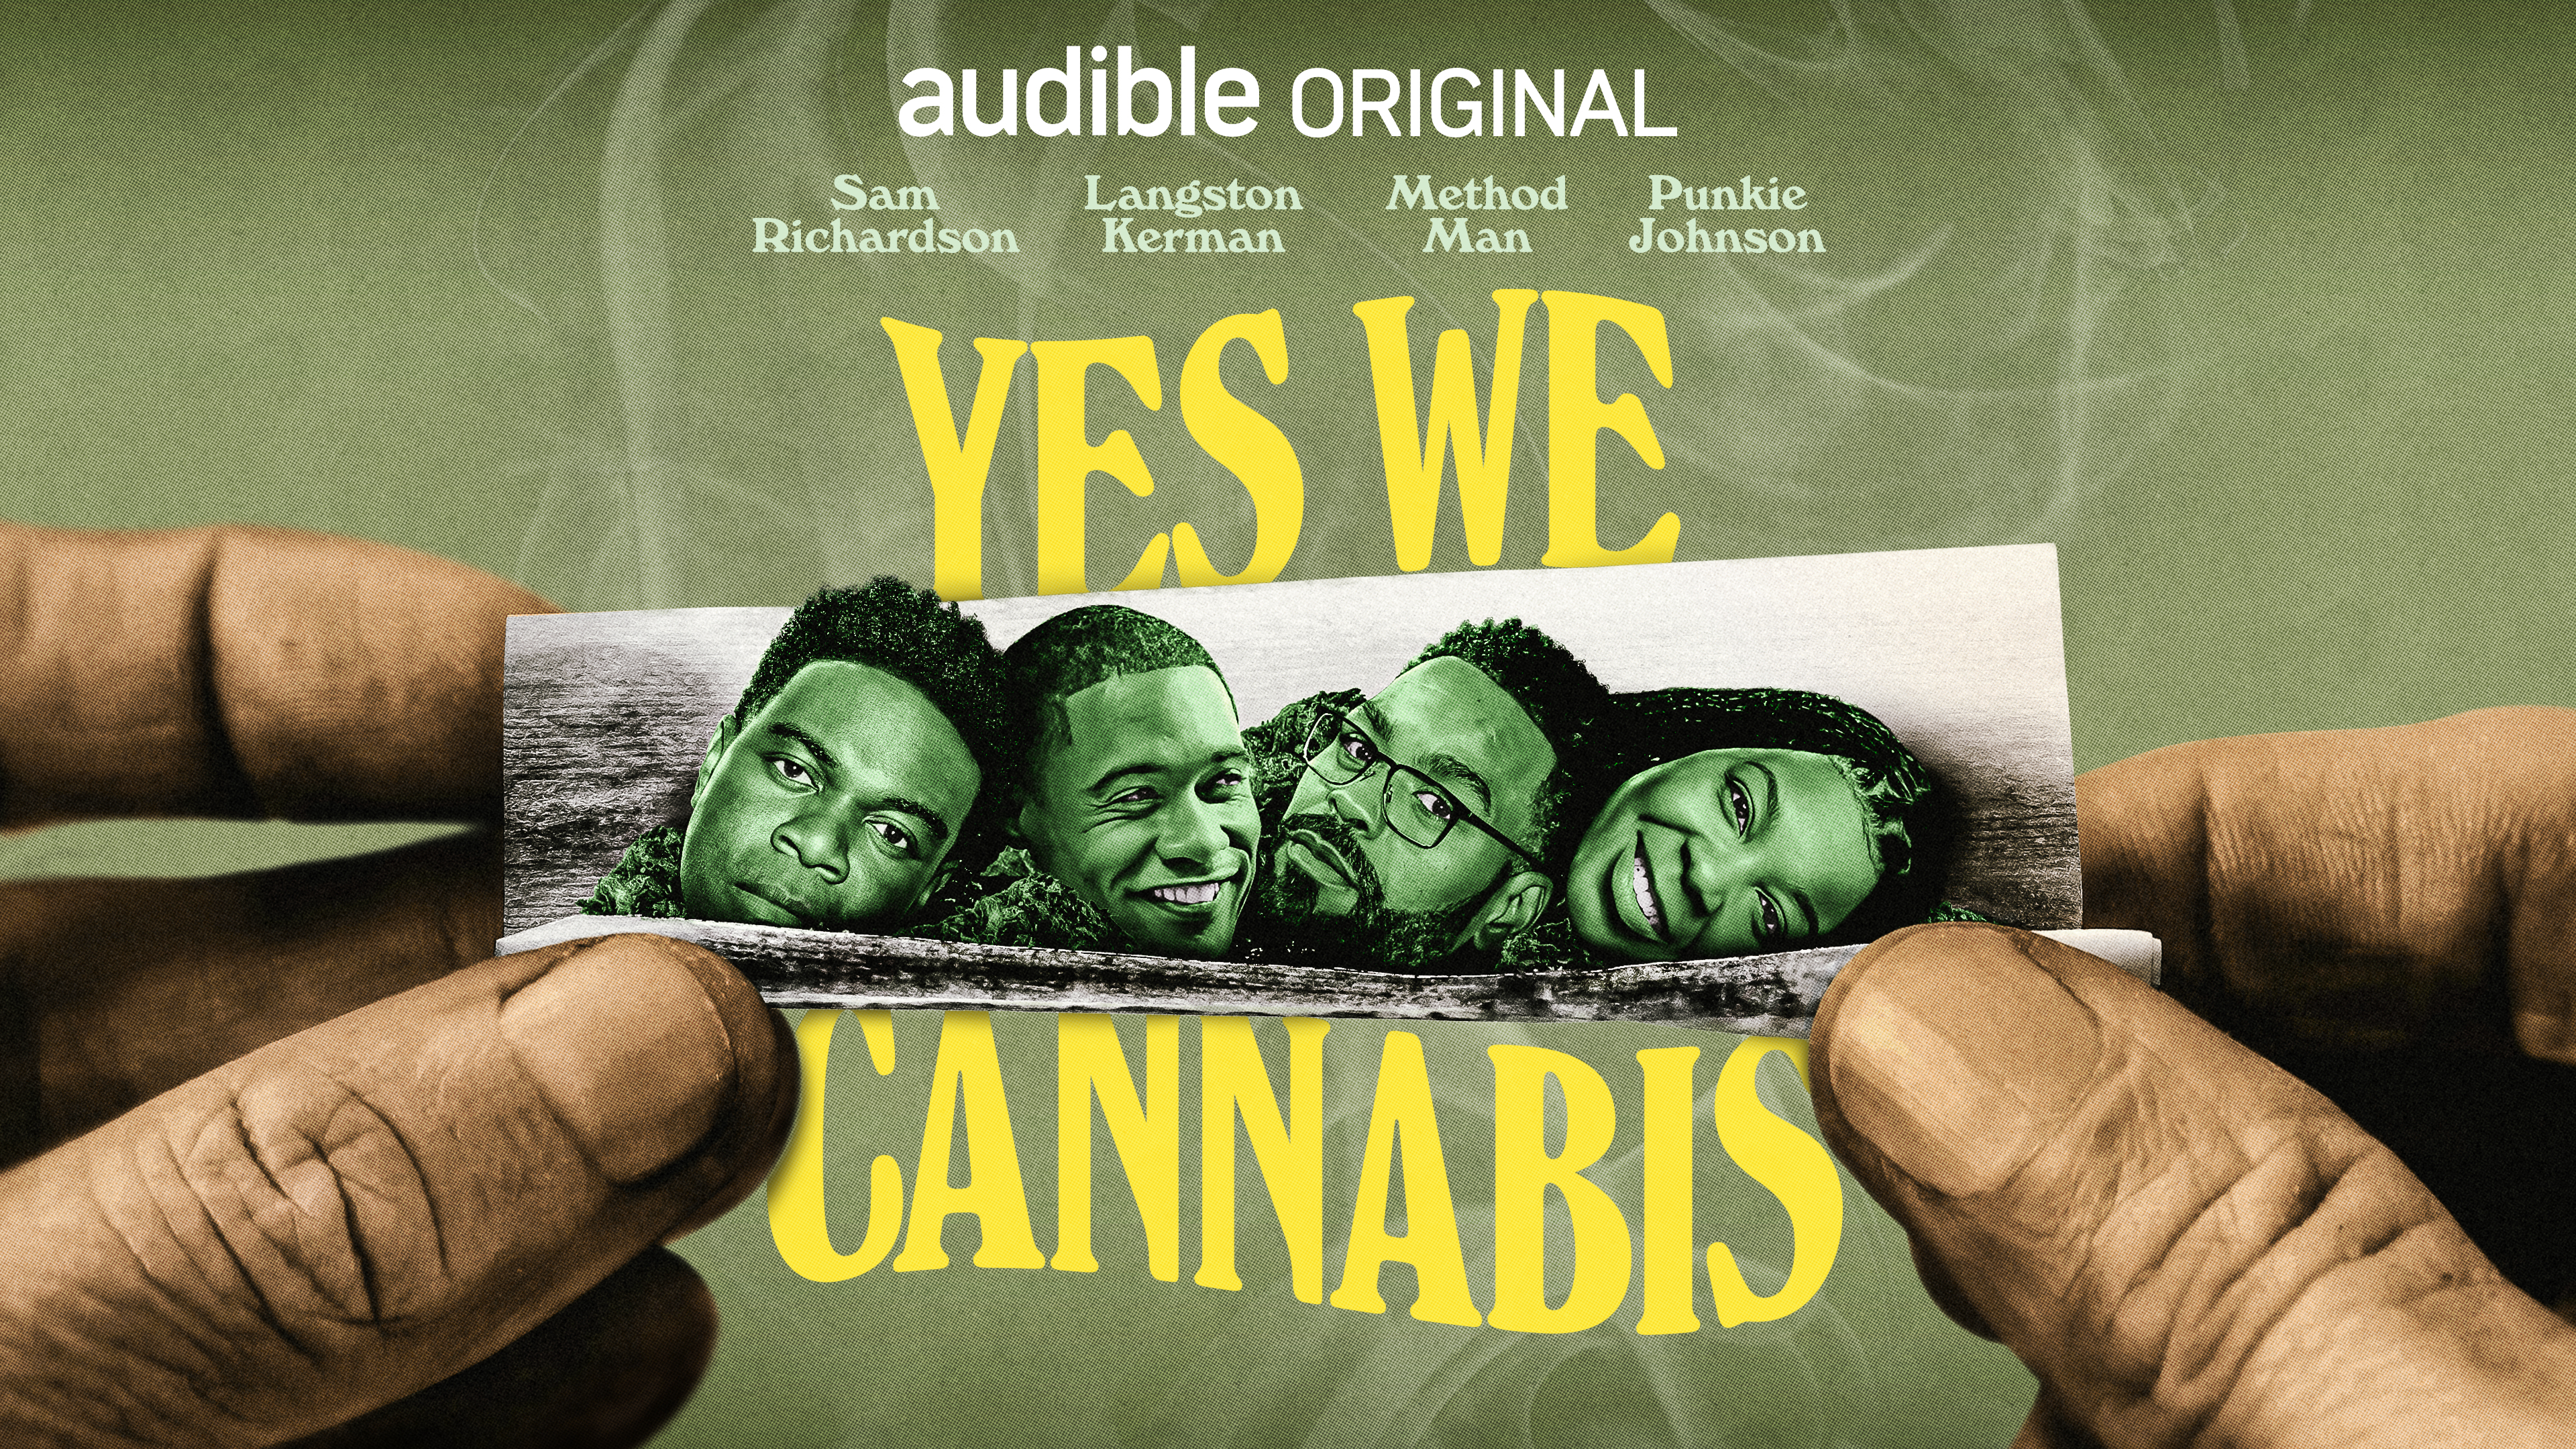 <div>‘Yes We Cannabis’ Method Man, Sam Richardson, Langston Kerman & Punkie Johnson Featured In Scripted Podcast Project</div>